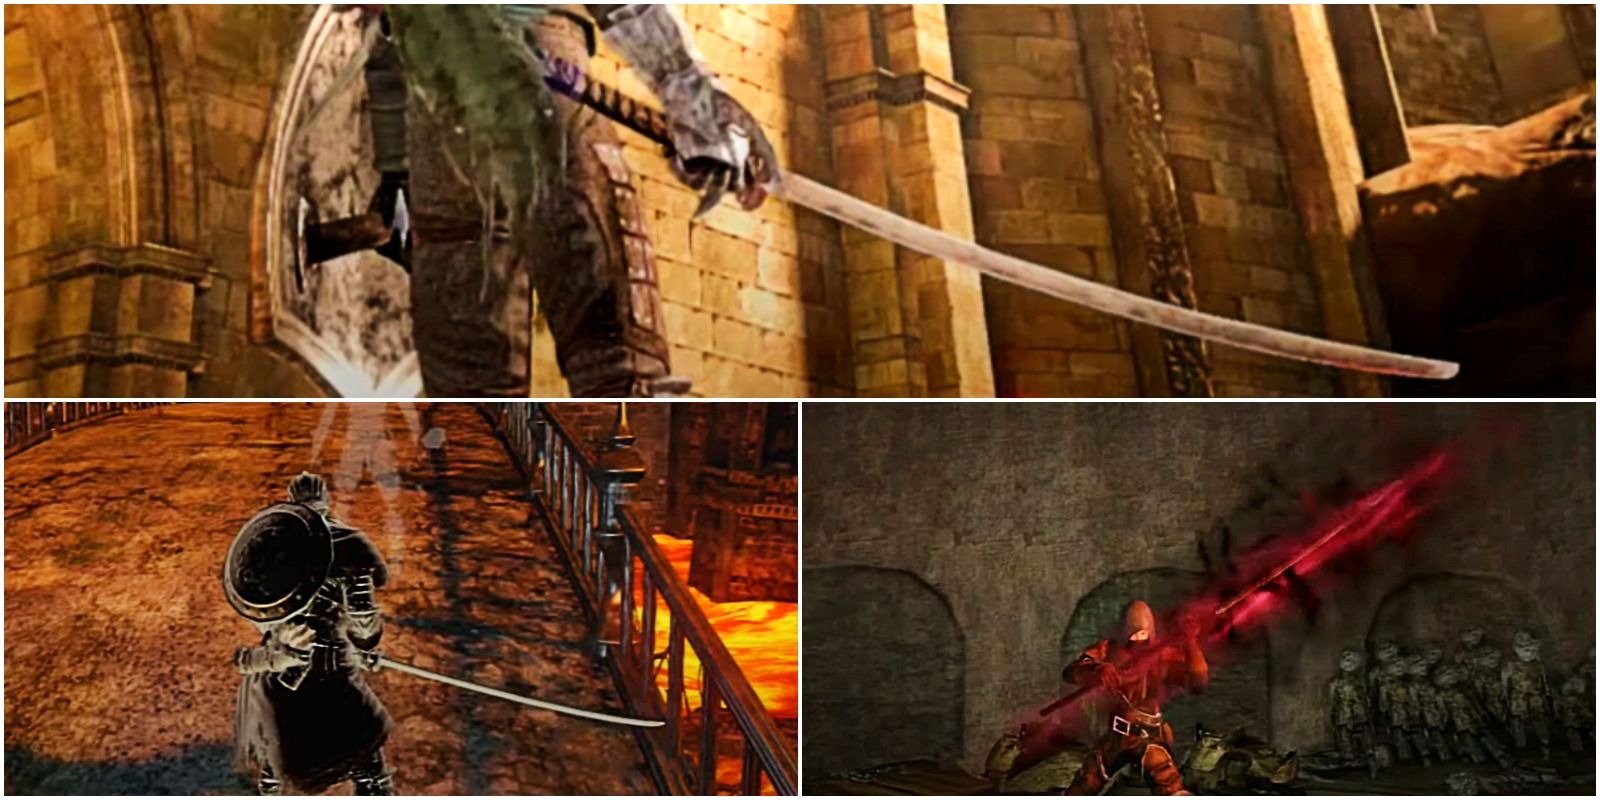 Top Six Weapons Of Dark Souls 2 In PvP/PvE 